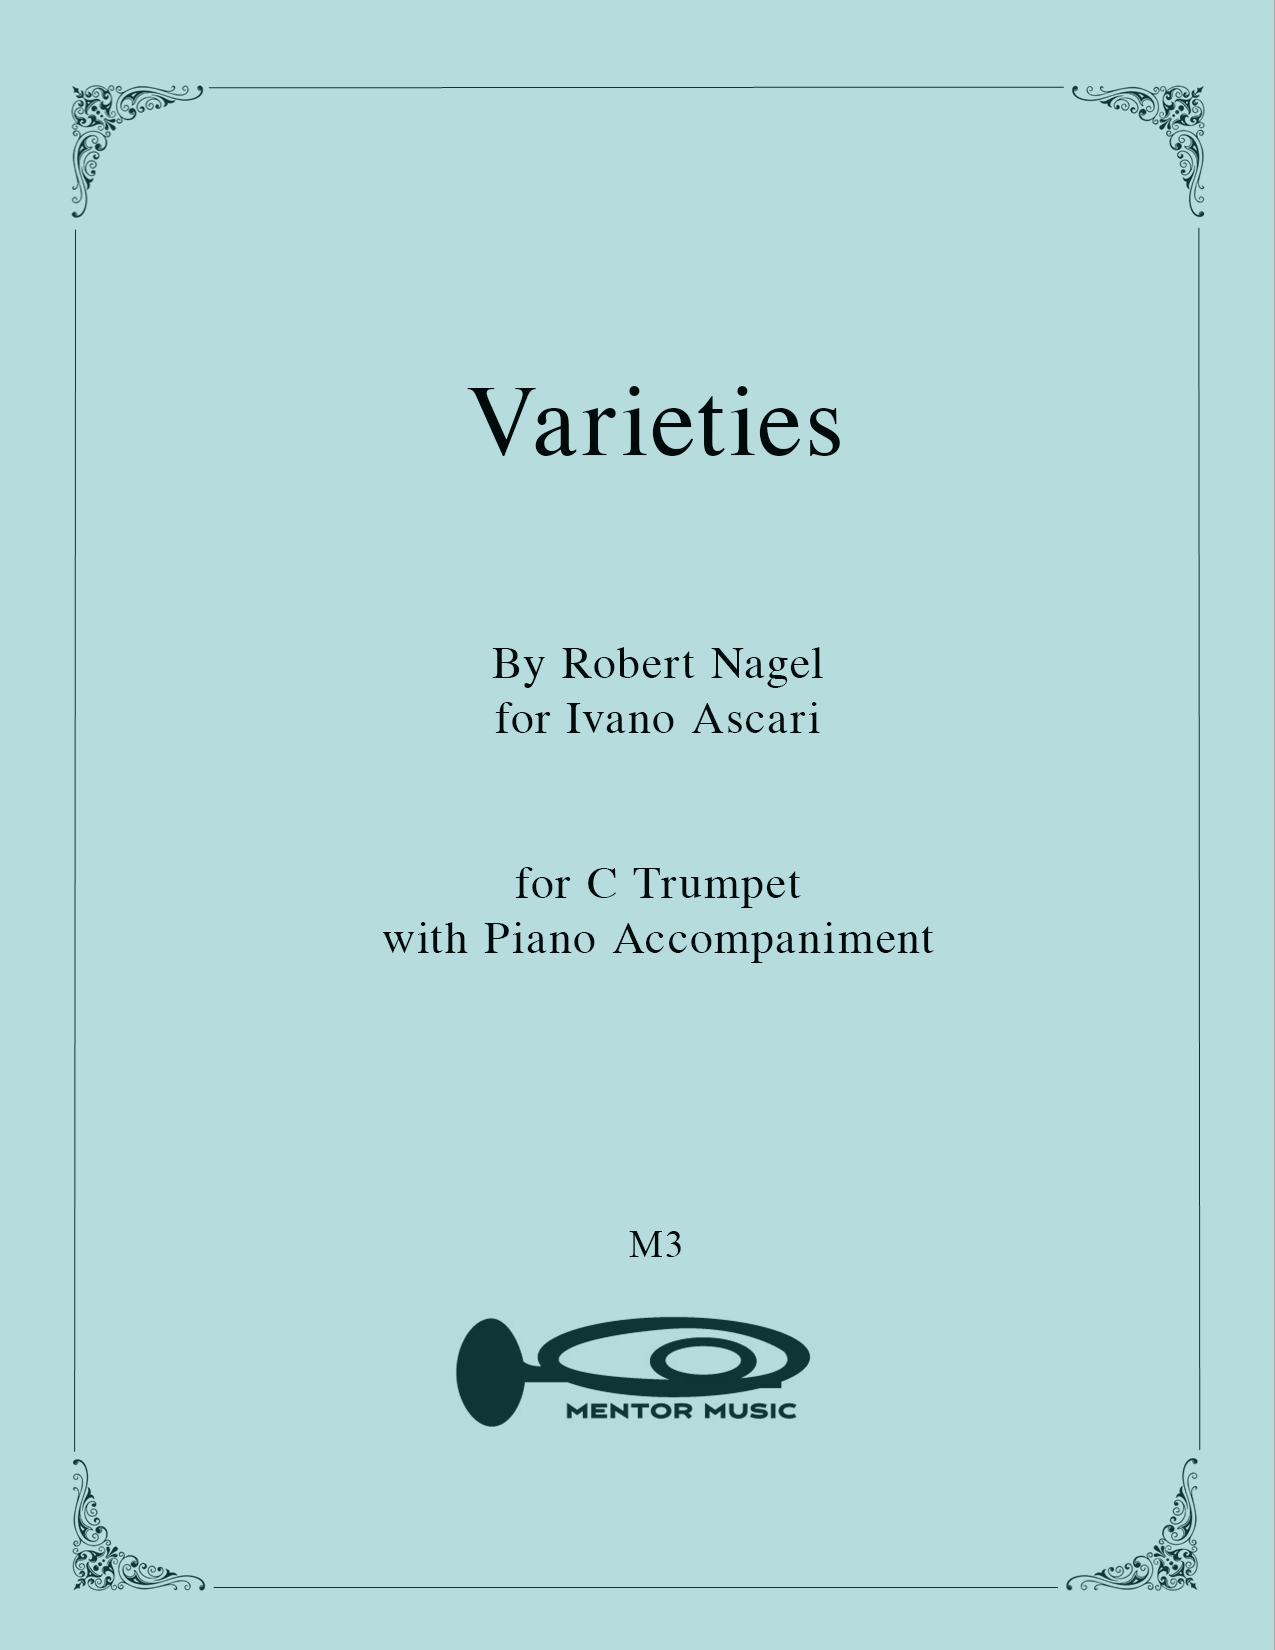 Varieties for C Trumpet and Piano